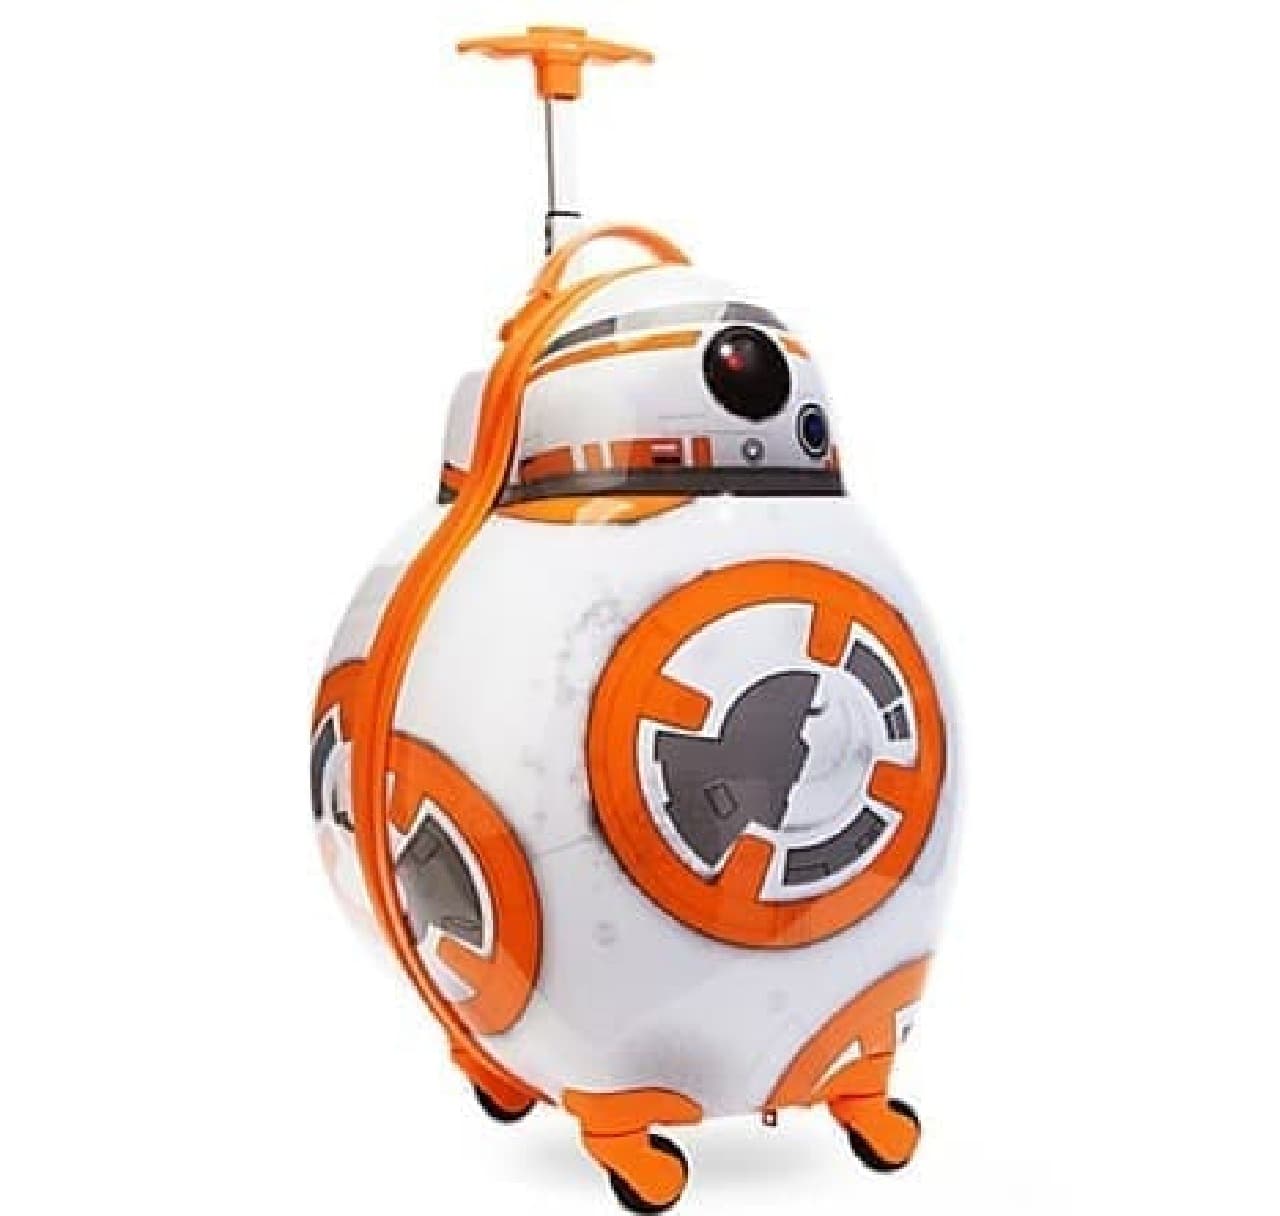 "Star Wars BB-8 Rolling Suitcase" Appears